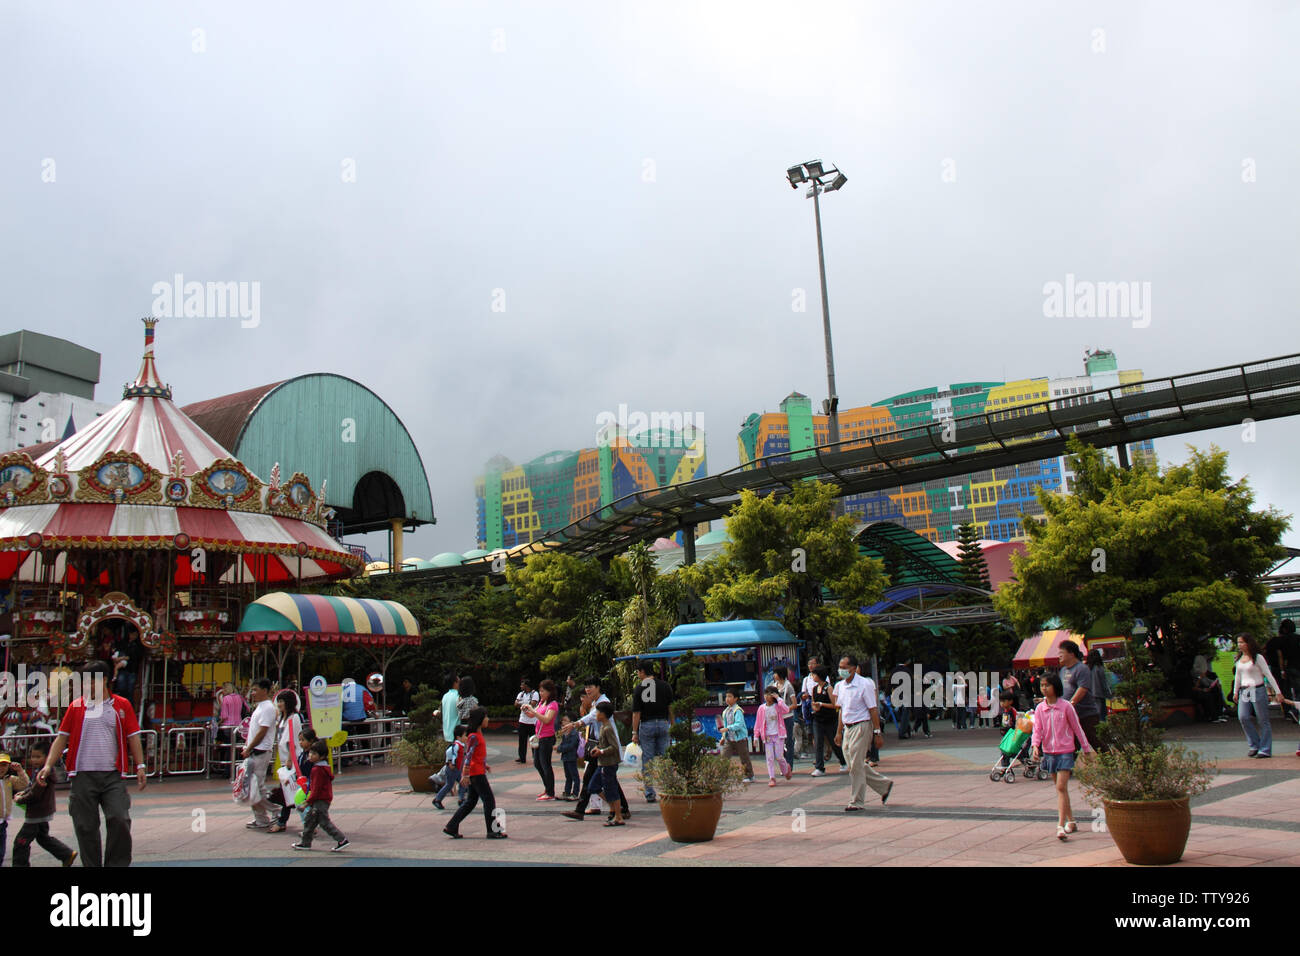 Outdoors theme park, Genting Highlands, Malaysia Stock Photo